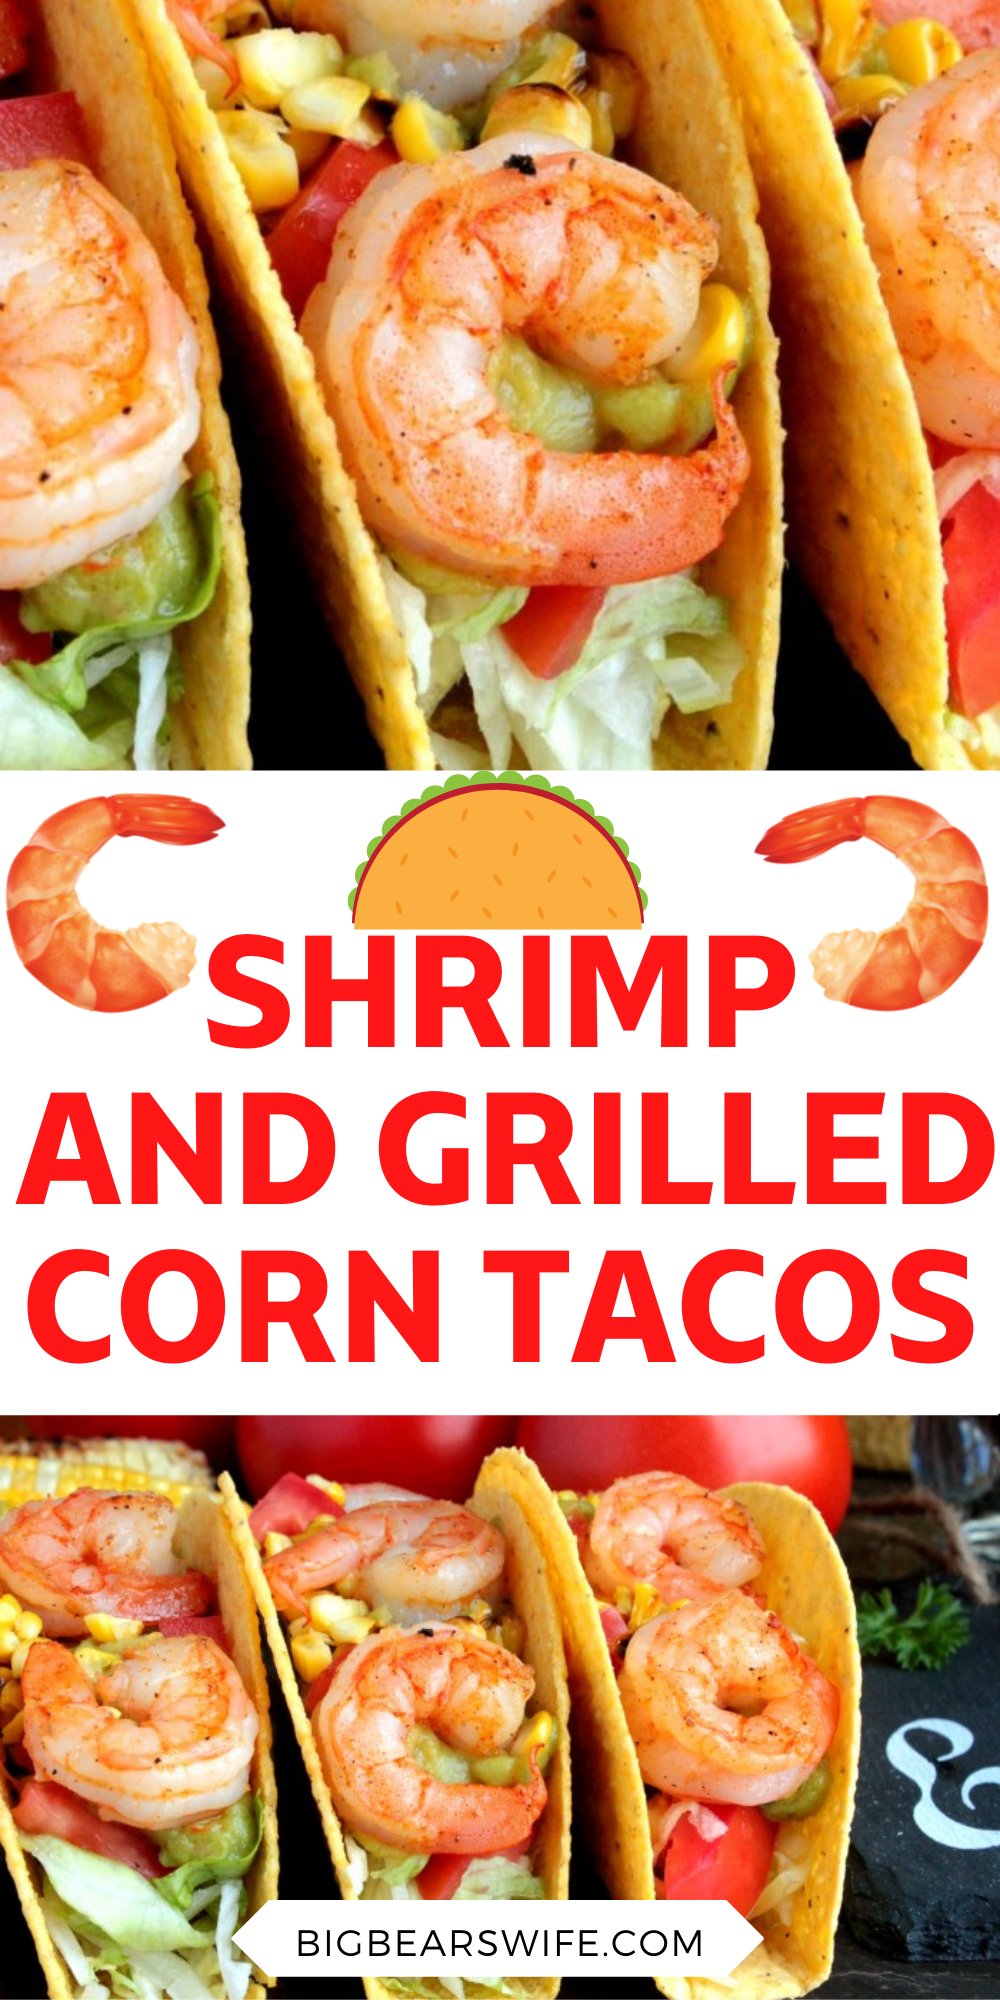 Easy Shrimp and Grilled Corn Tacos that pretty much scream summer! Grilled corn, seasoned shrimp and your favorite fillings make for one perfect taco meal! via @bigbearswife